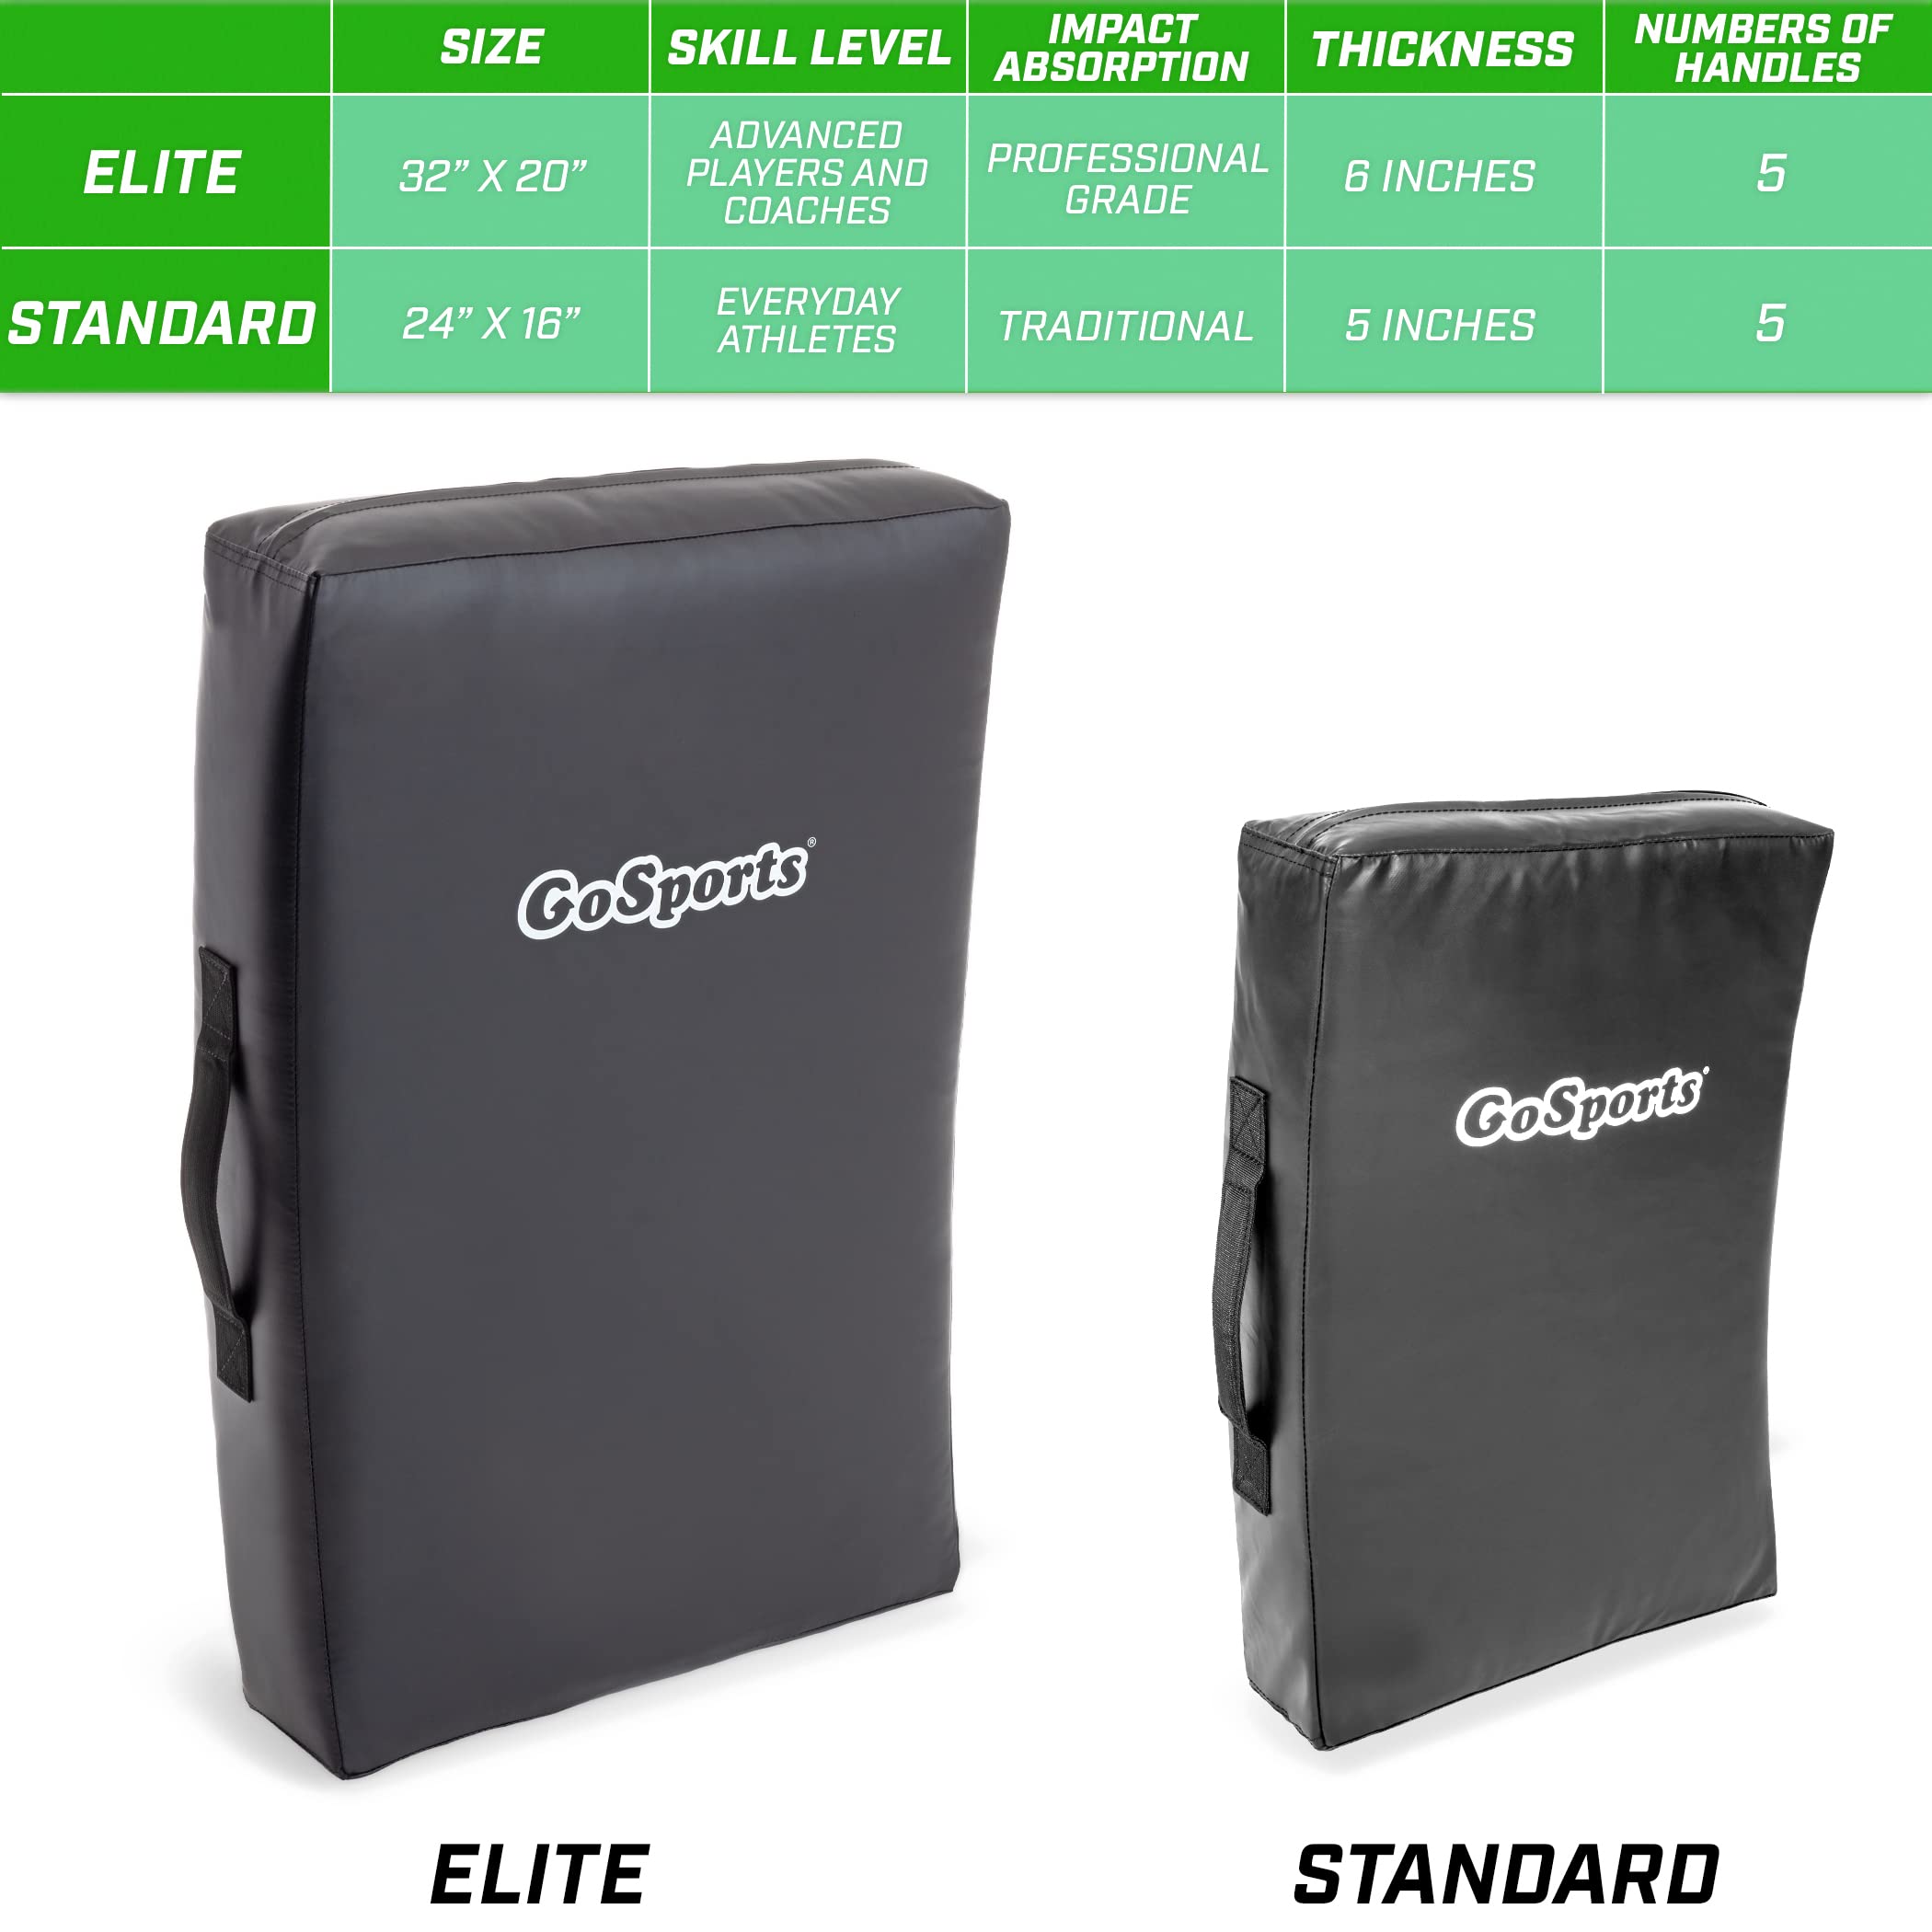 GoSports Blocking Pads - Great for Martial Arts & Sports Training (Football, Basketball, Hockey, Lacrosse and More) - Standard or XL Sizes